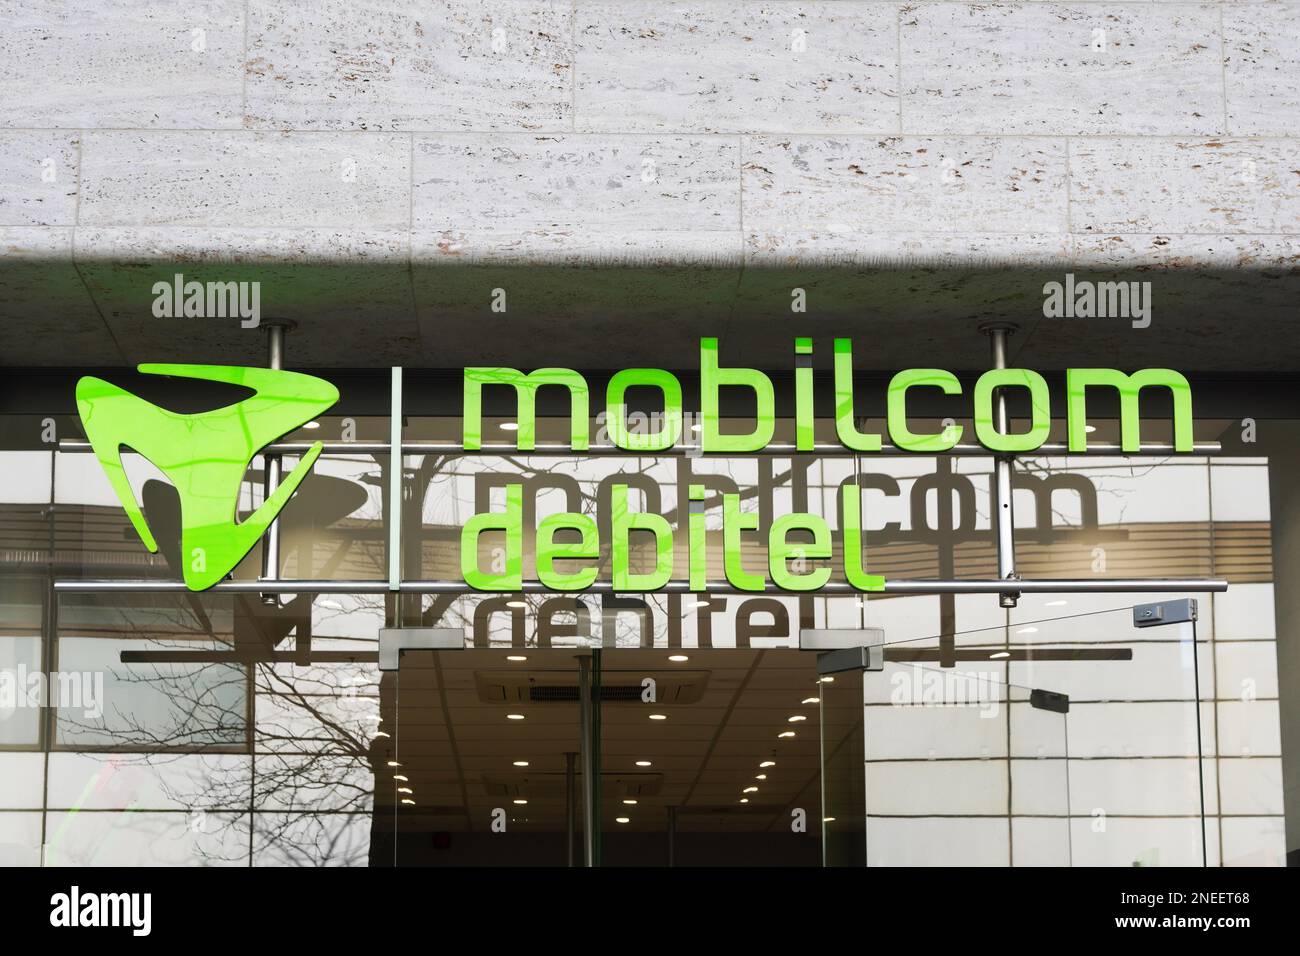 Hannover, Germany - March 2, 2020: Mobilcom Debitel is a german mobile service provider and telecommunications company Stock Photo